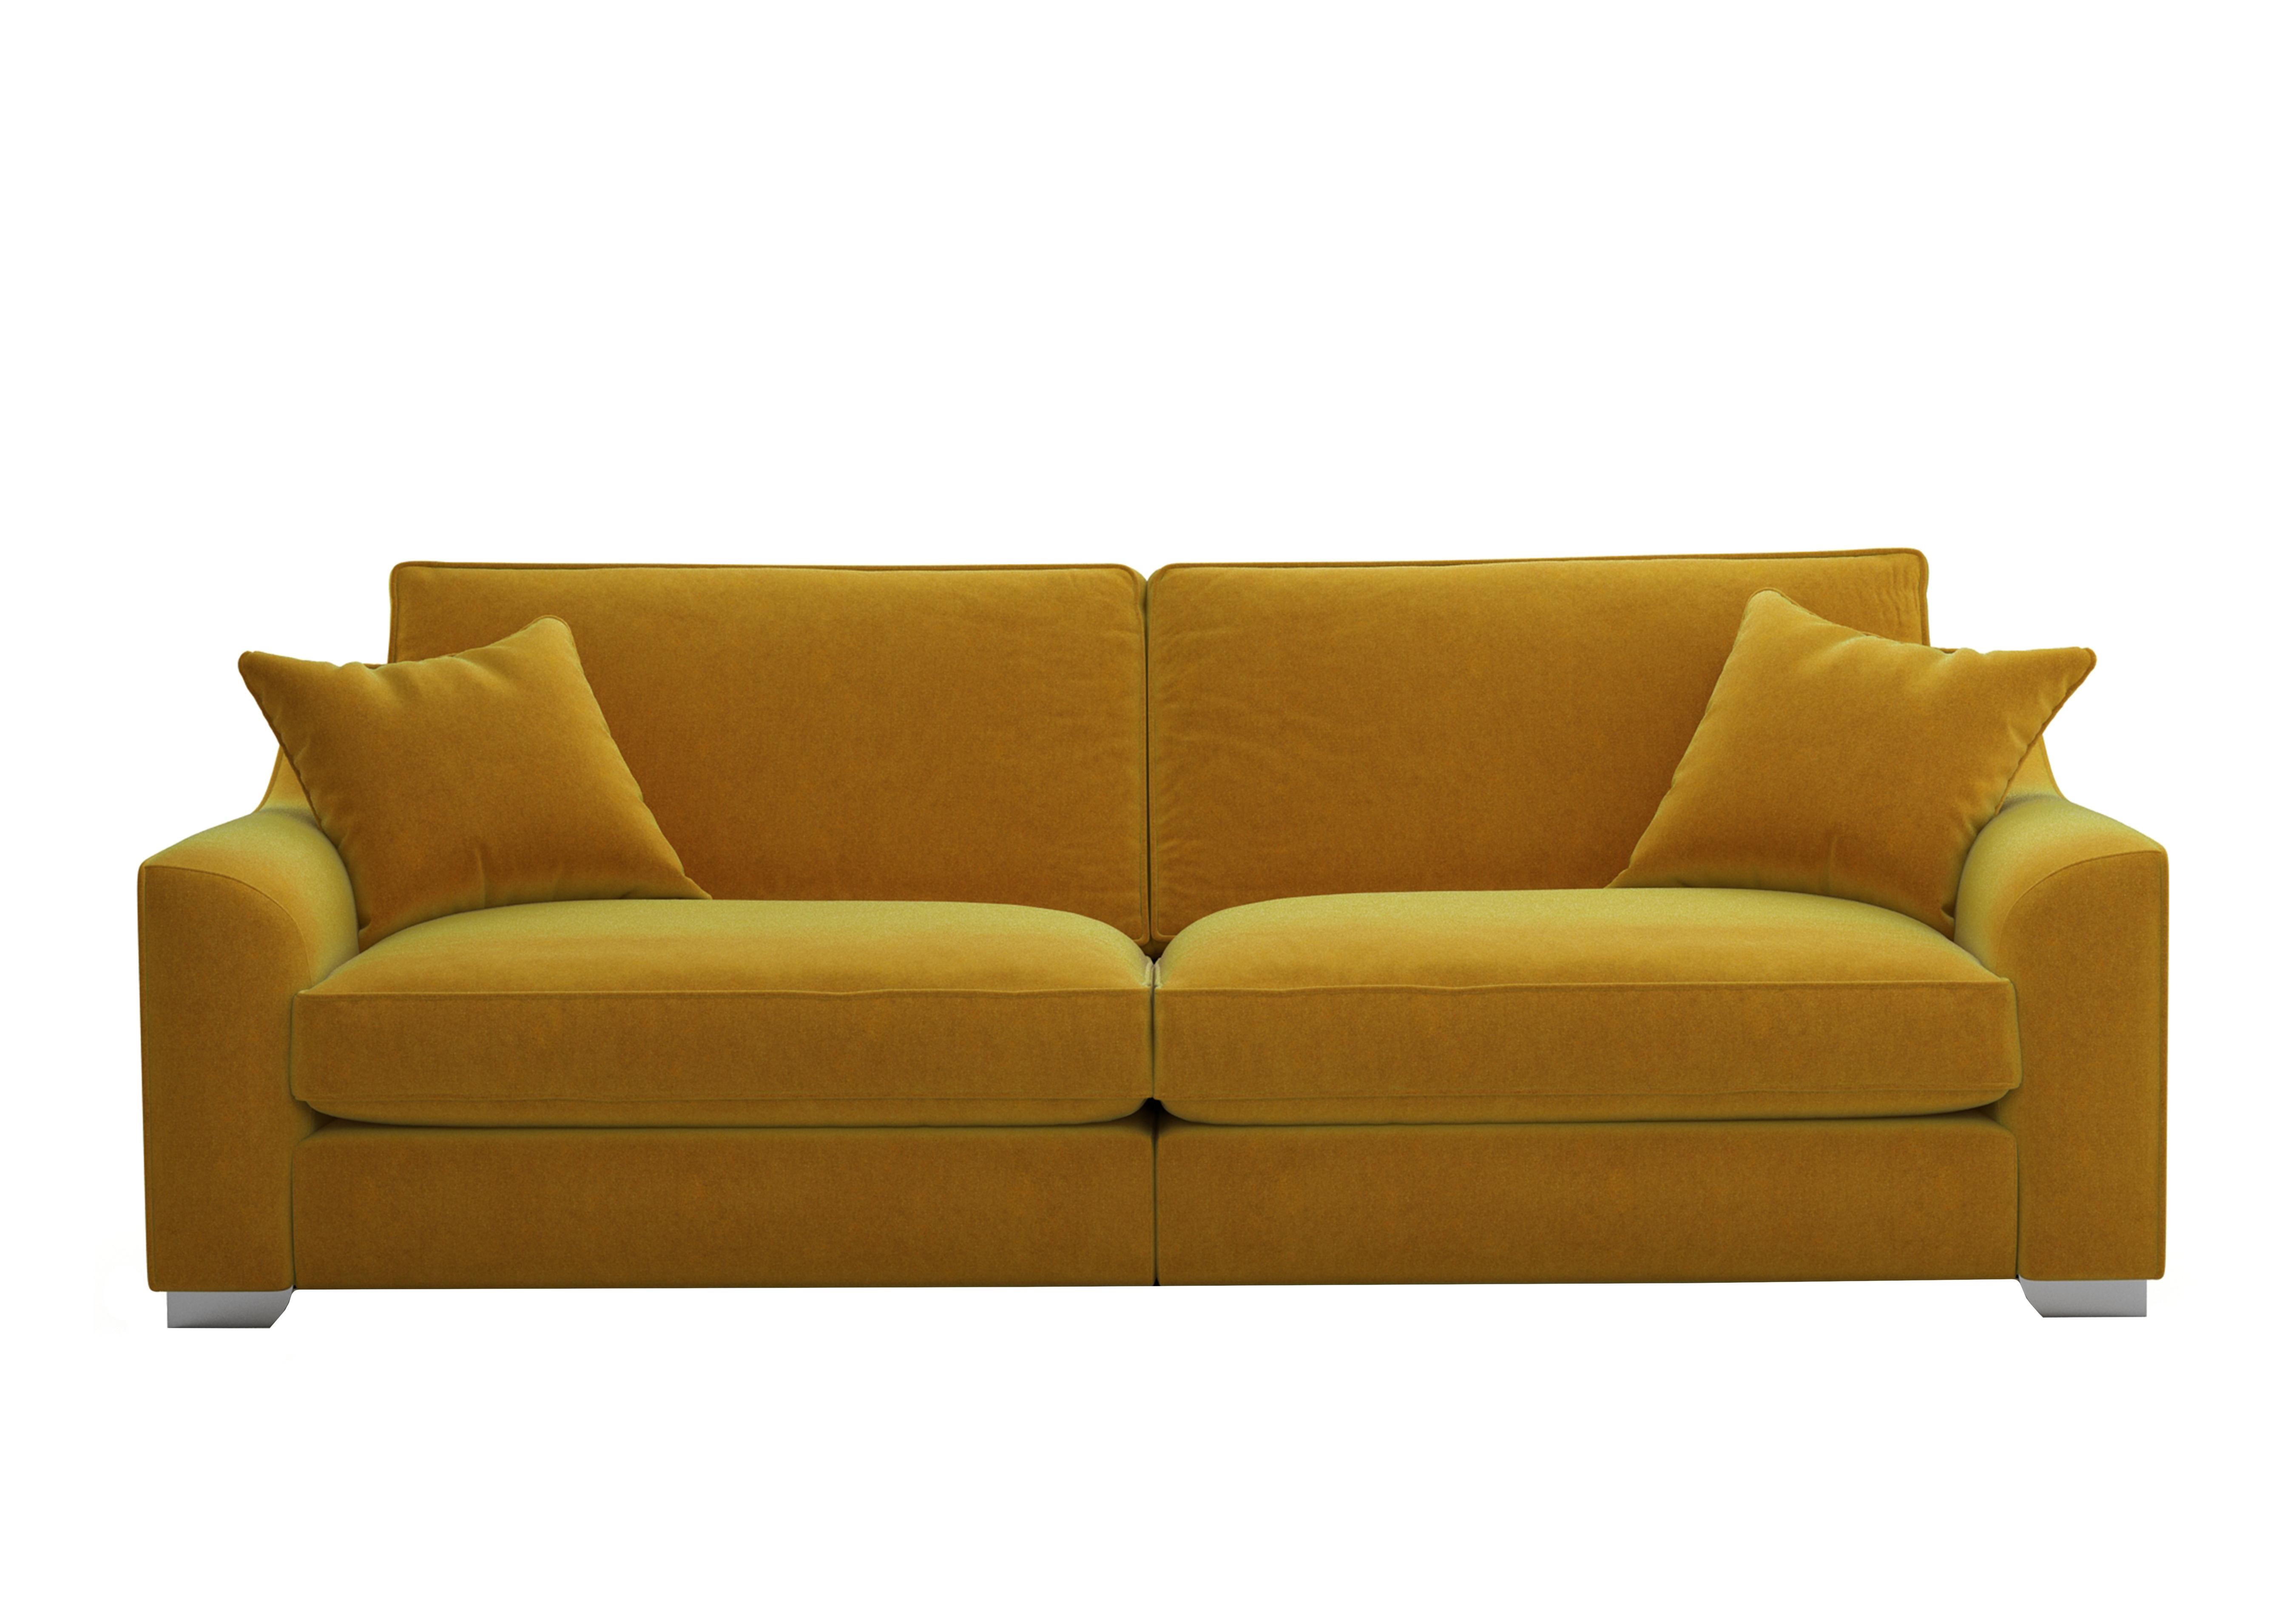 Isobel 4 Seater Fabric Sofa in Gol204 Golden Spice Ch Ft on Furniture Village